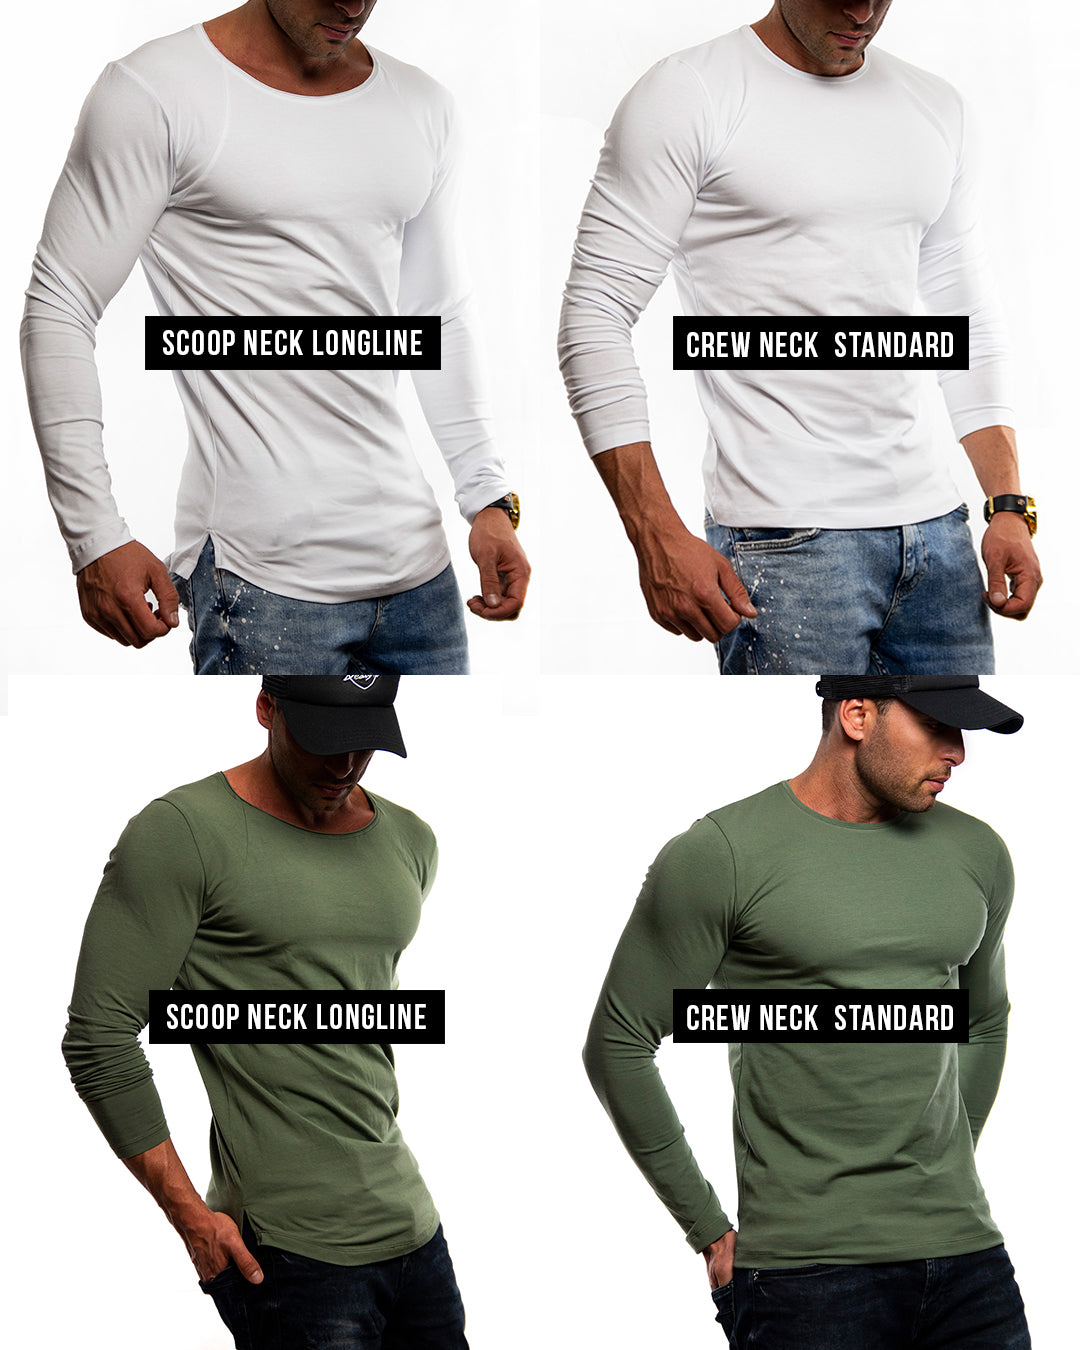 Mens Long Sleeve T-shirt "Great things come with the hustle" MD973